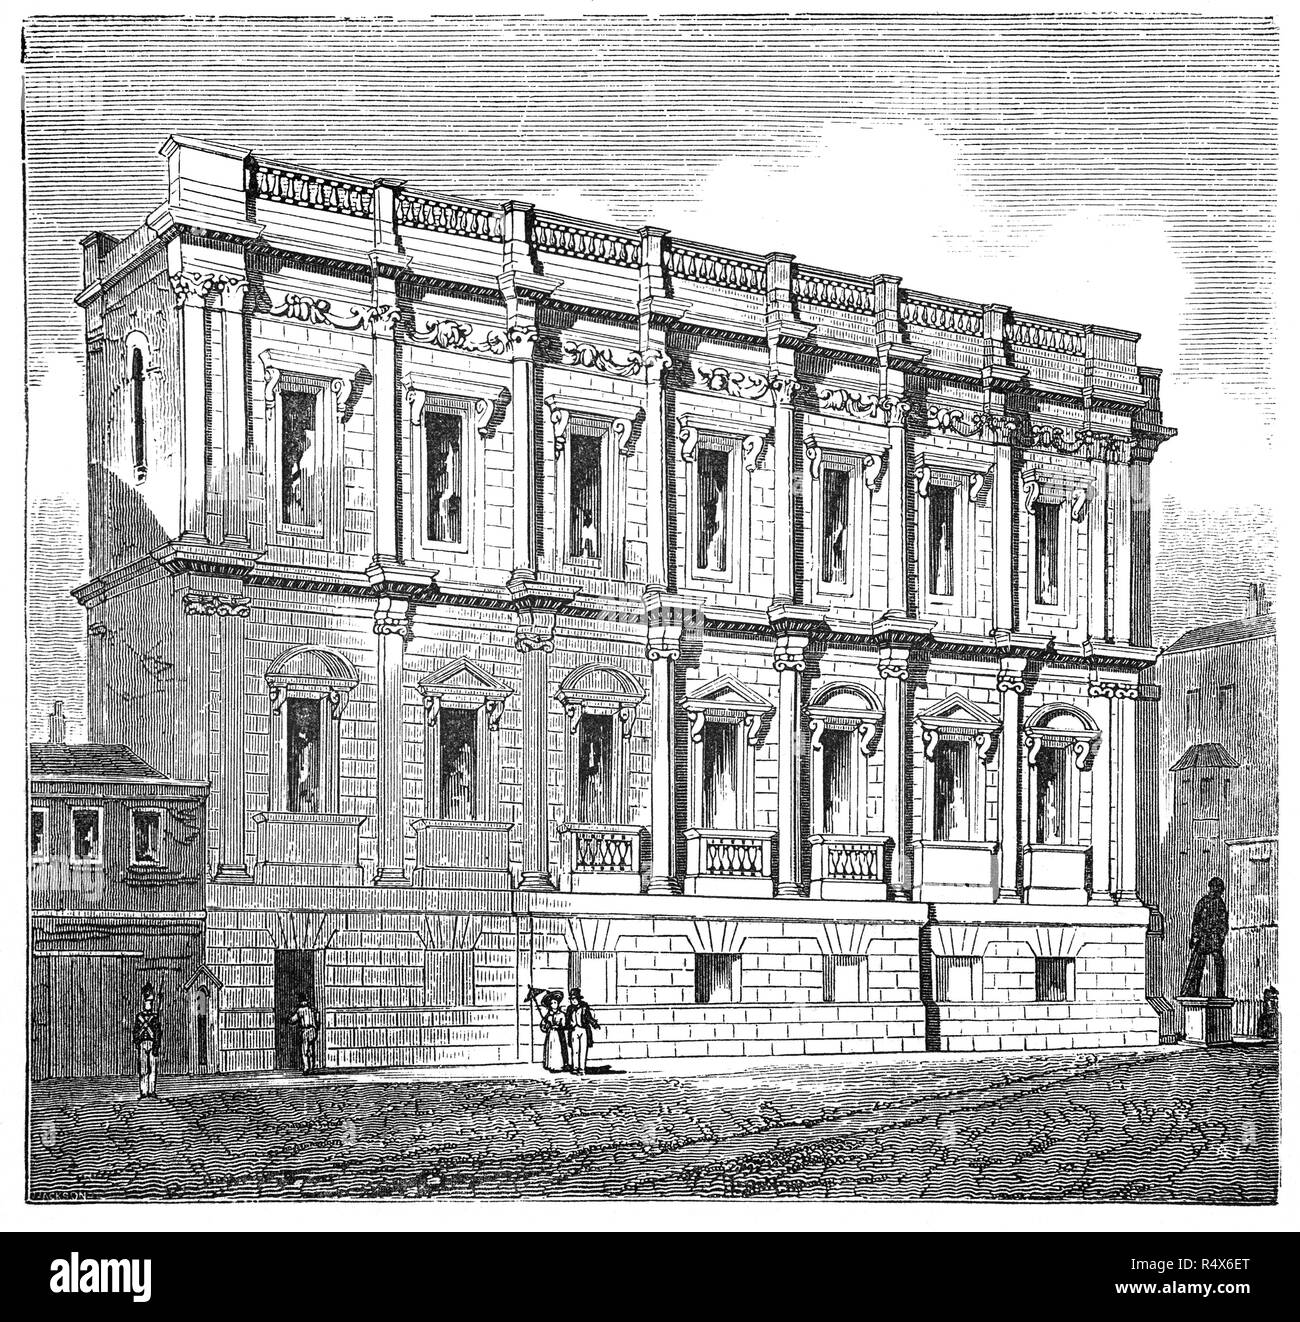 The Banqueting House, Whitehall, is the grandest and best known survivor of the architectural genre of banqueting house and the only remaining component of the Palace of Whitehall. The building is important in the history of English architecture as the first structure to be completed in the neo-classical style, which was to transform English architecture. Begun in 1619 and designed by Inigo Jones it was completed in 1622, 27 years before King Charles I of England was beheaded on a scaffold in front of it in January 1649. Stock Photo